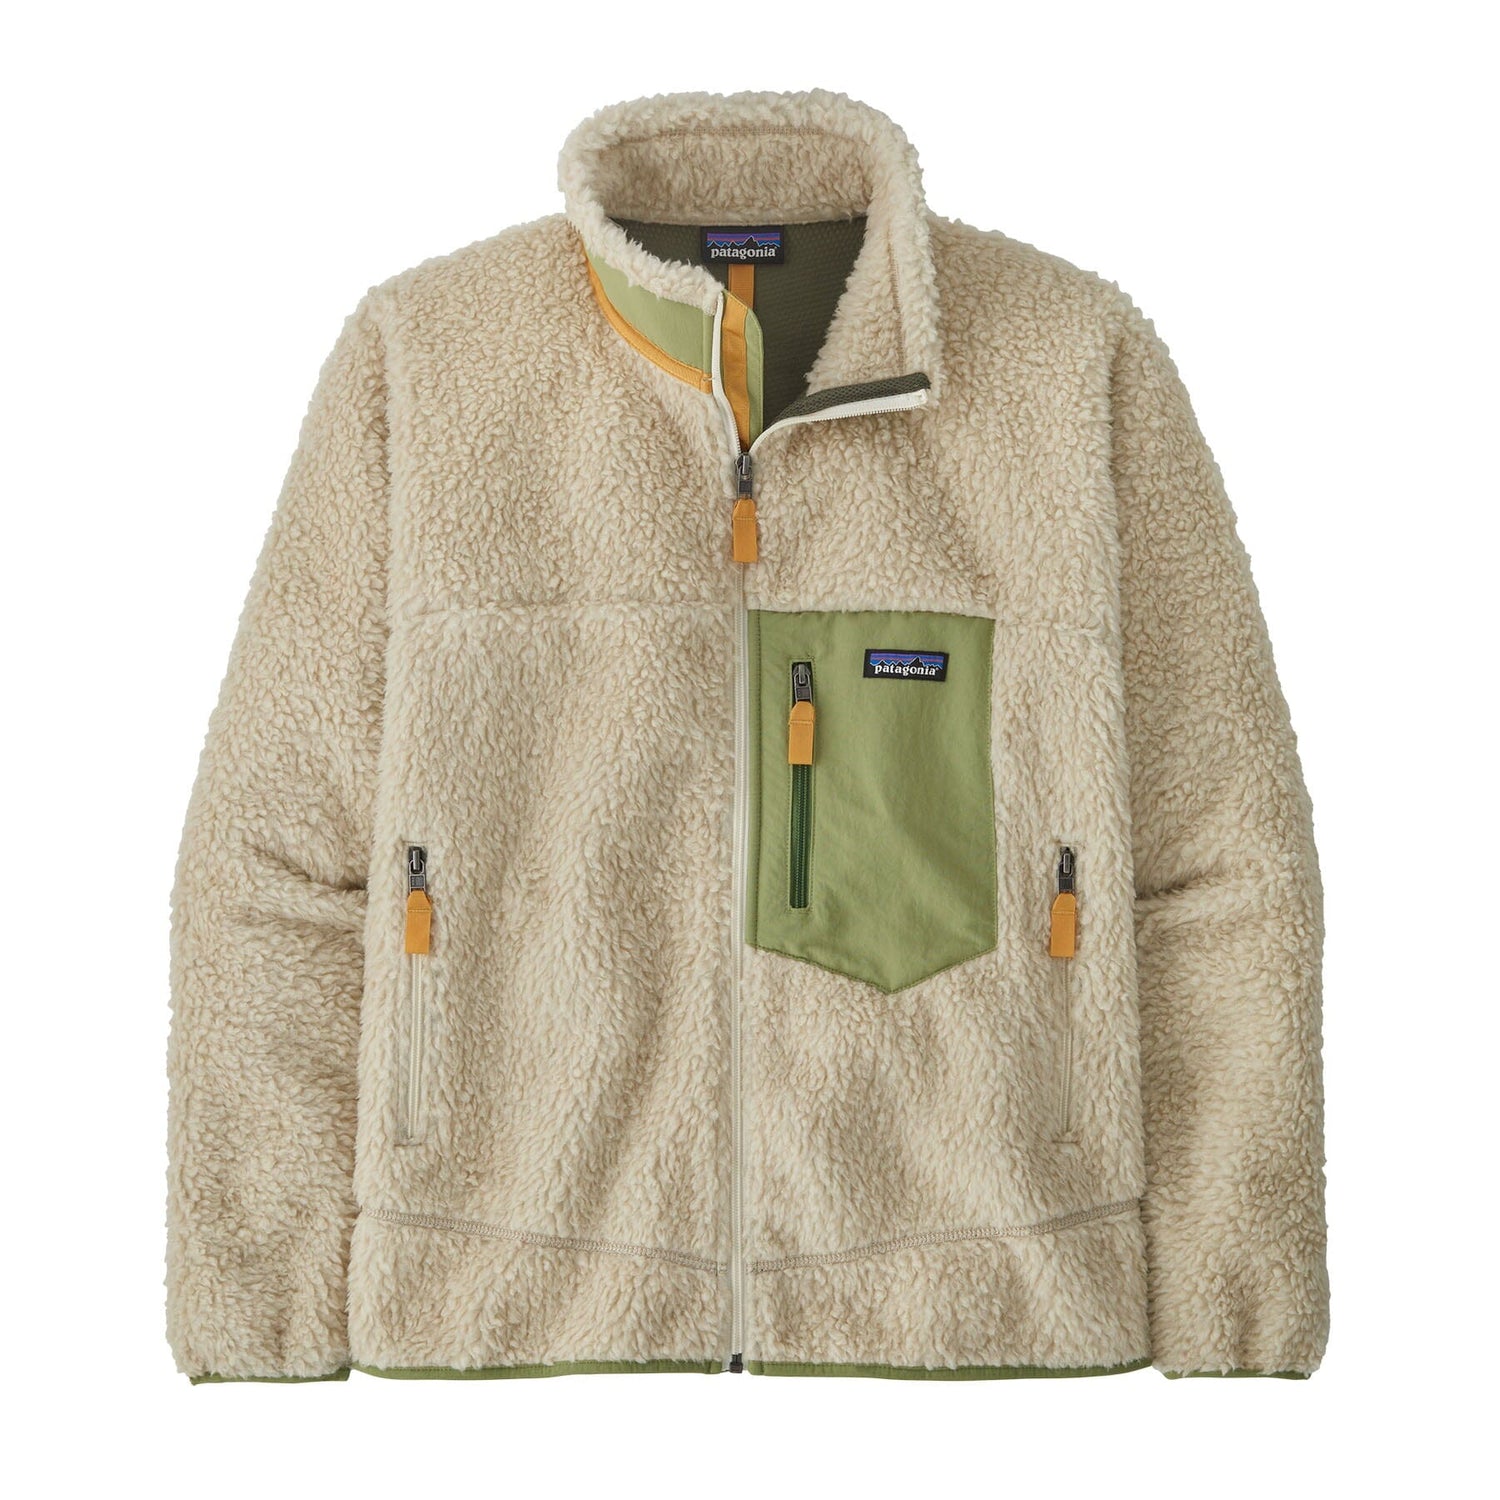 Patagonia - M's Classic Retro-X Fleece Jacket - Recycled Polyester - Weekendbee - sustainable sportswear